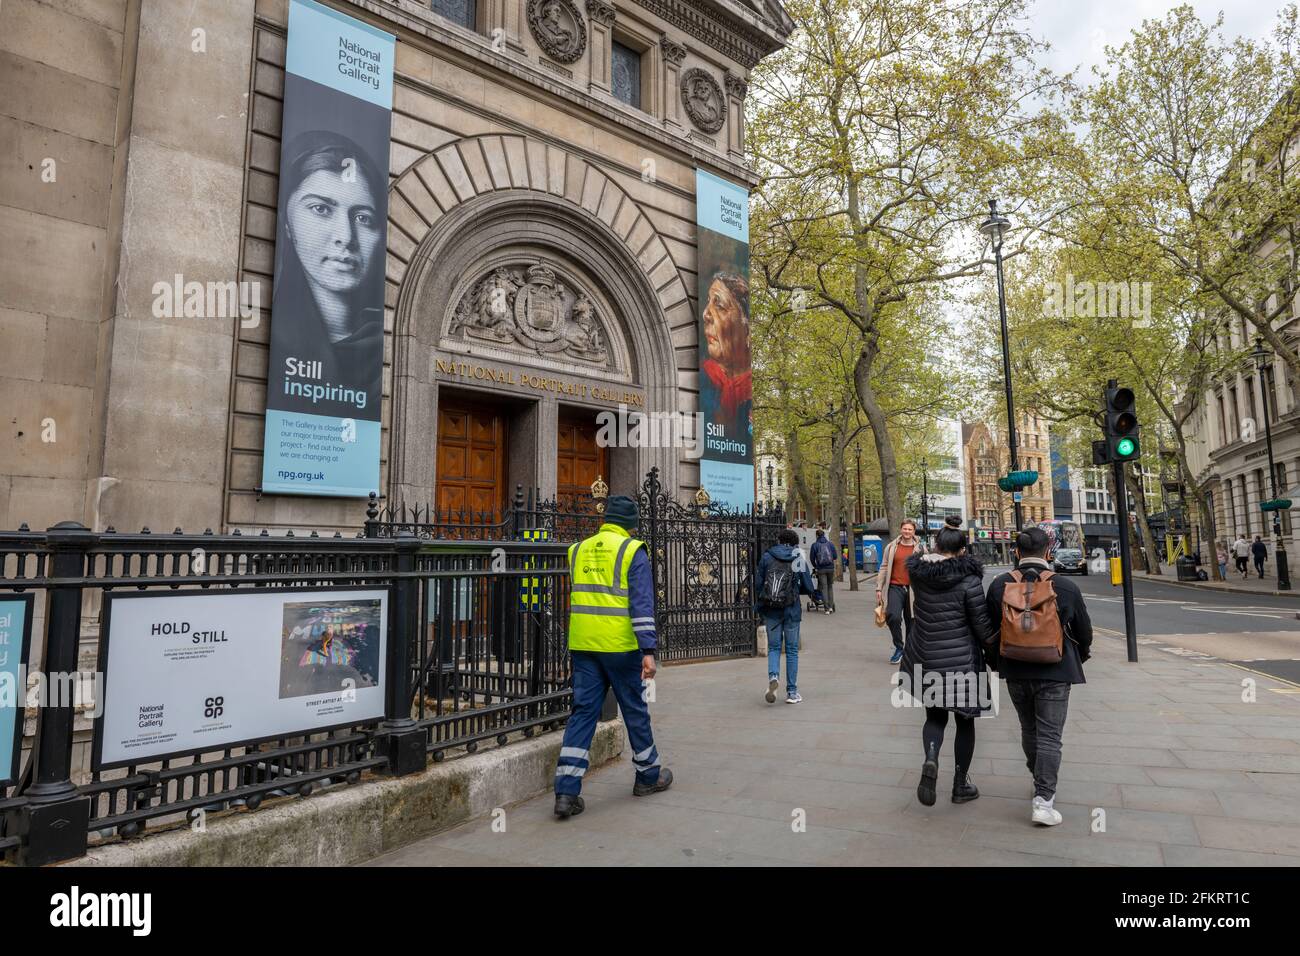 A street view of the National Portrait Gallery which house a collect of famous people portraits. Stock Photo